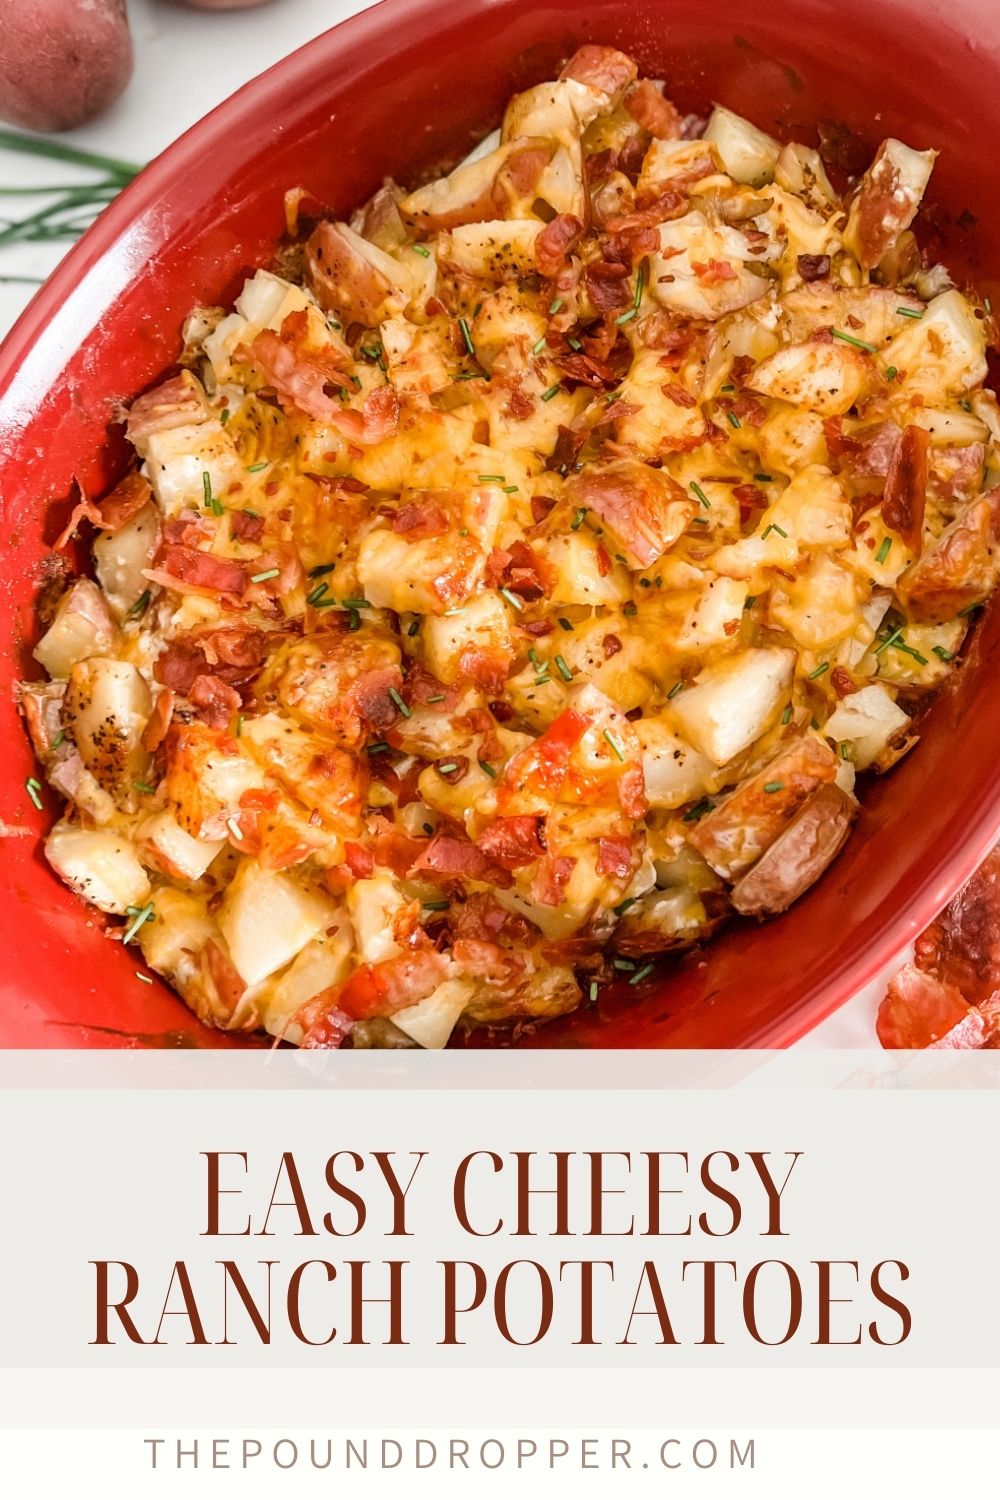 These Easy Cheesy Ranch Potatoes are full of flavor-they're creamy, cheesy, and irresistibly delicious. These easy cheesy potatoes taste decadent but are made lighter with a few simple ingredient swaps! via @pounddropper